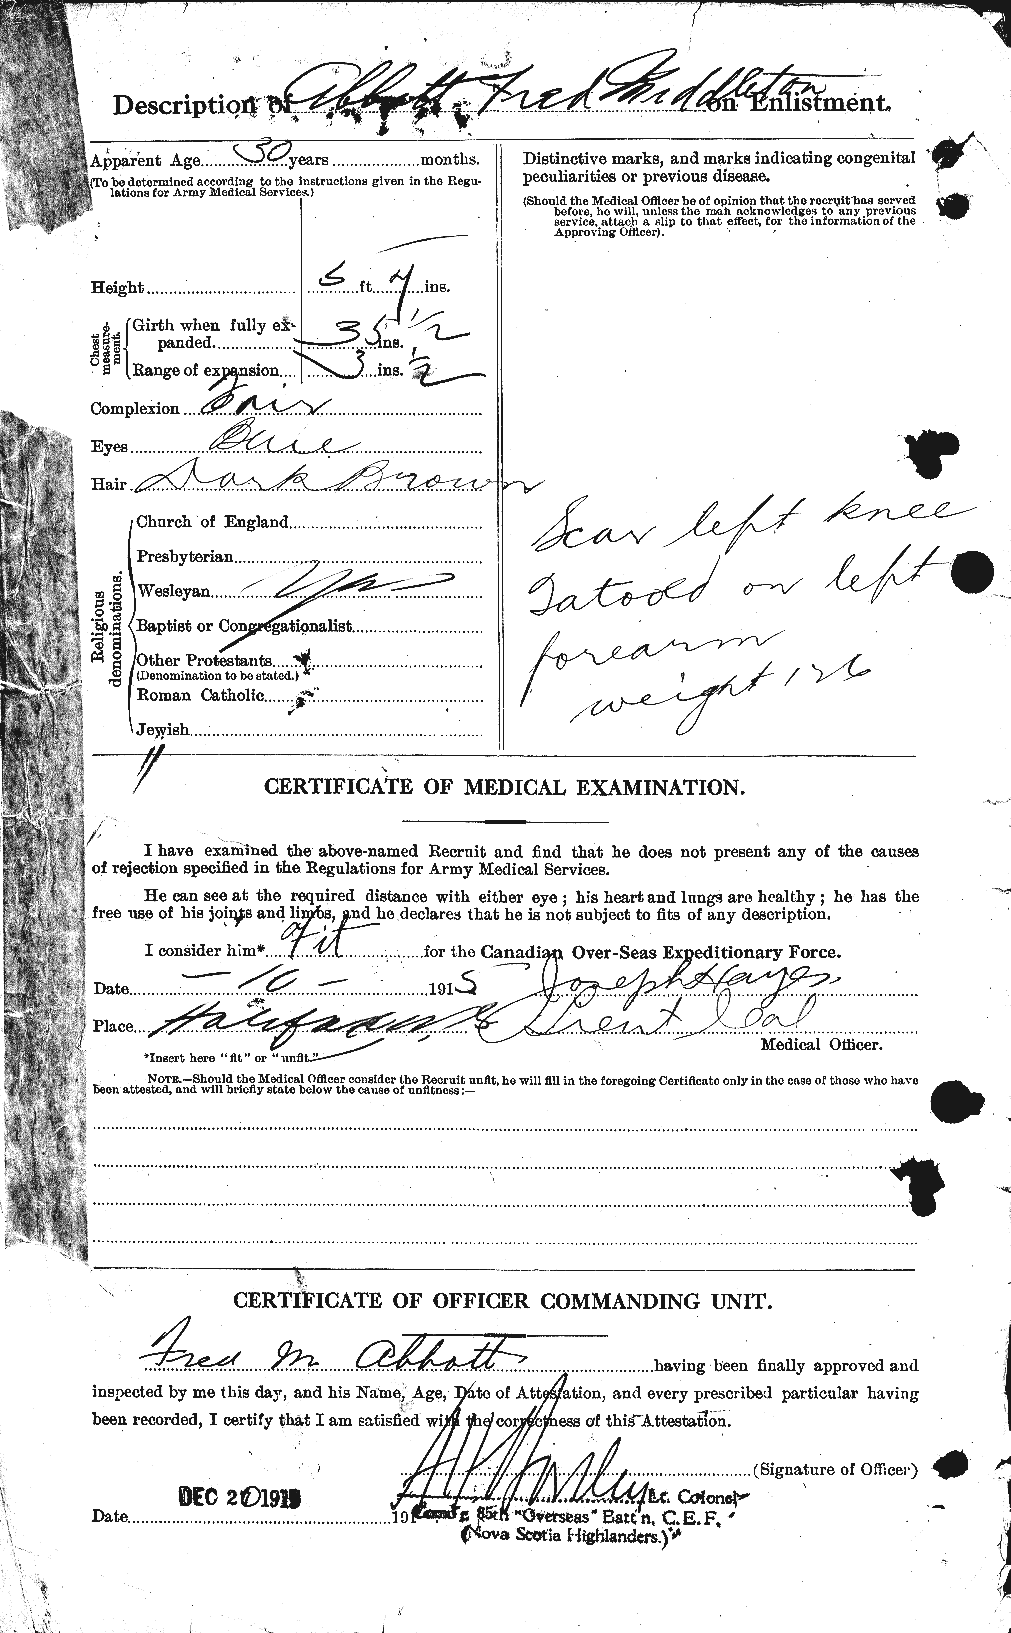 Personnel Records of the First World War - CEF 200922b